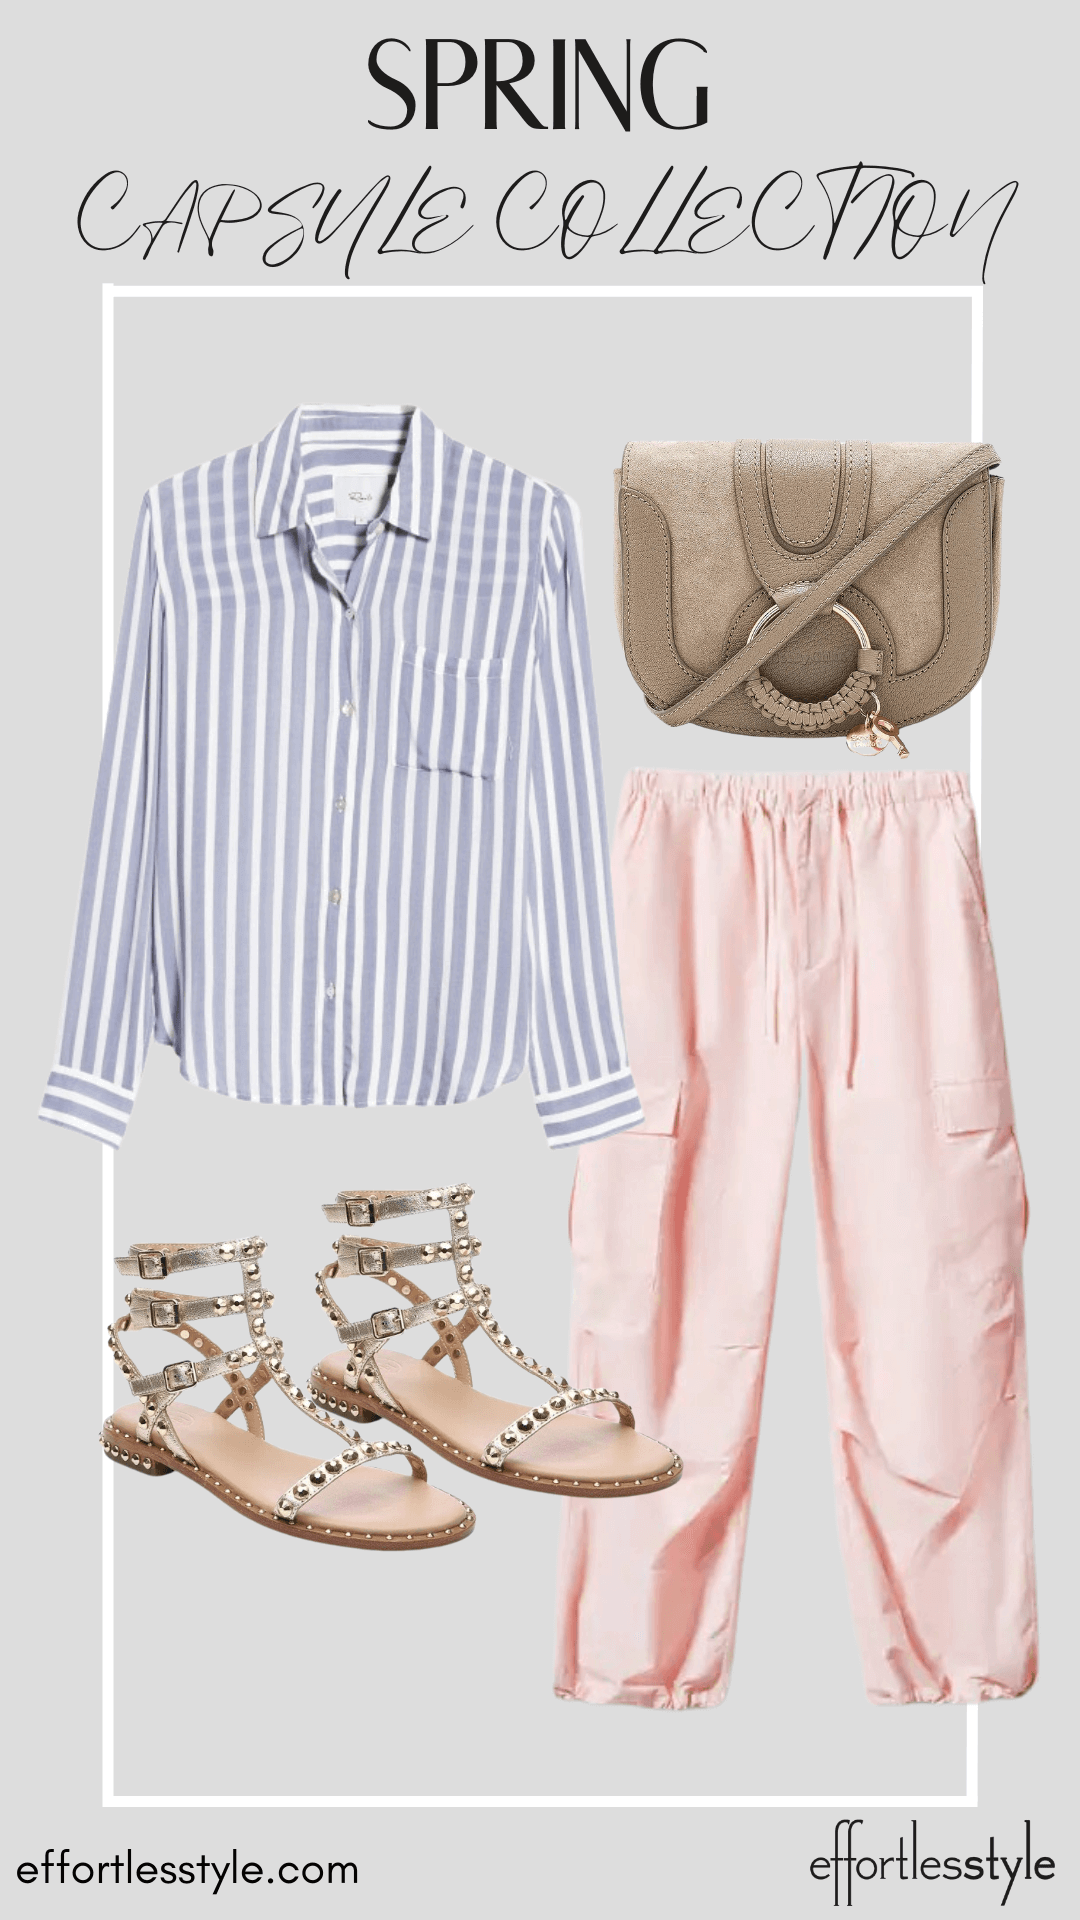 How To Wear Our Spring Capsule Wardrobe - Part 2 Striped Button-Up Shirt & Cargo Pants how to dress your cargo pants up how to pair a button-up shirt with cargo pants how to style a button up shirt for spring the best spring accessories how to style gold sandals this spring